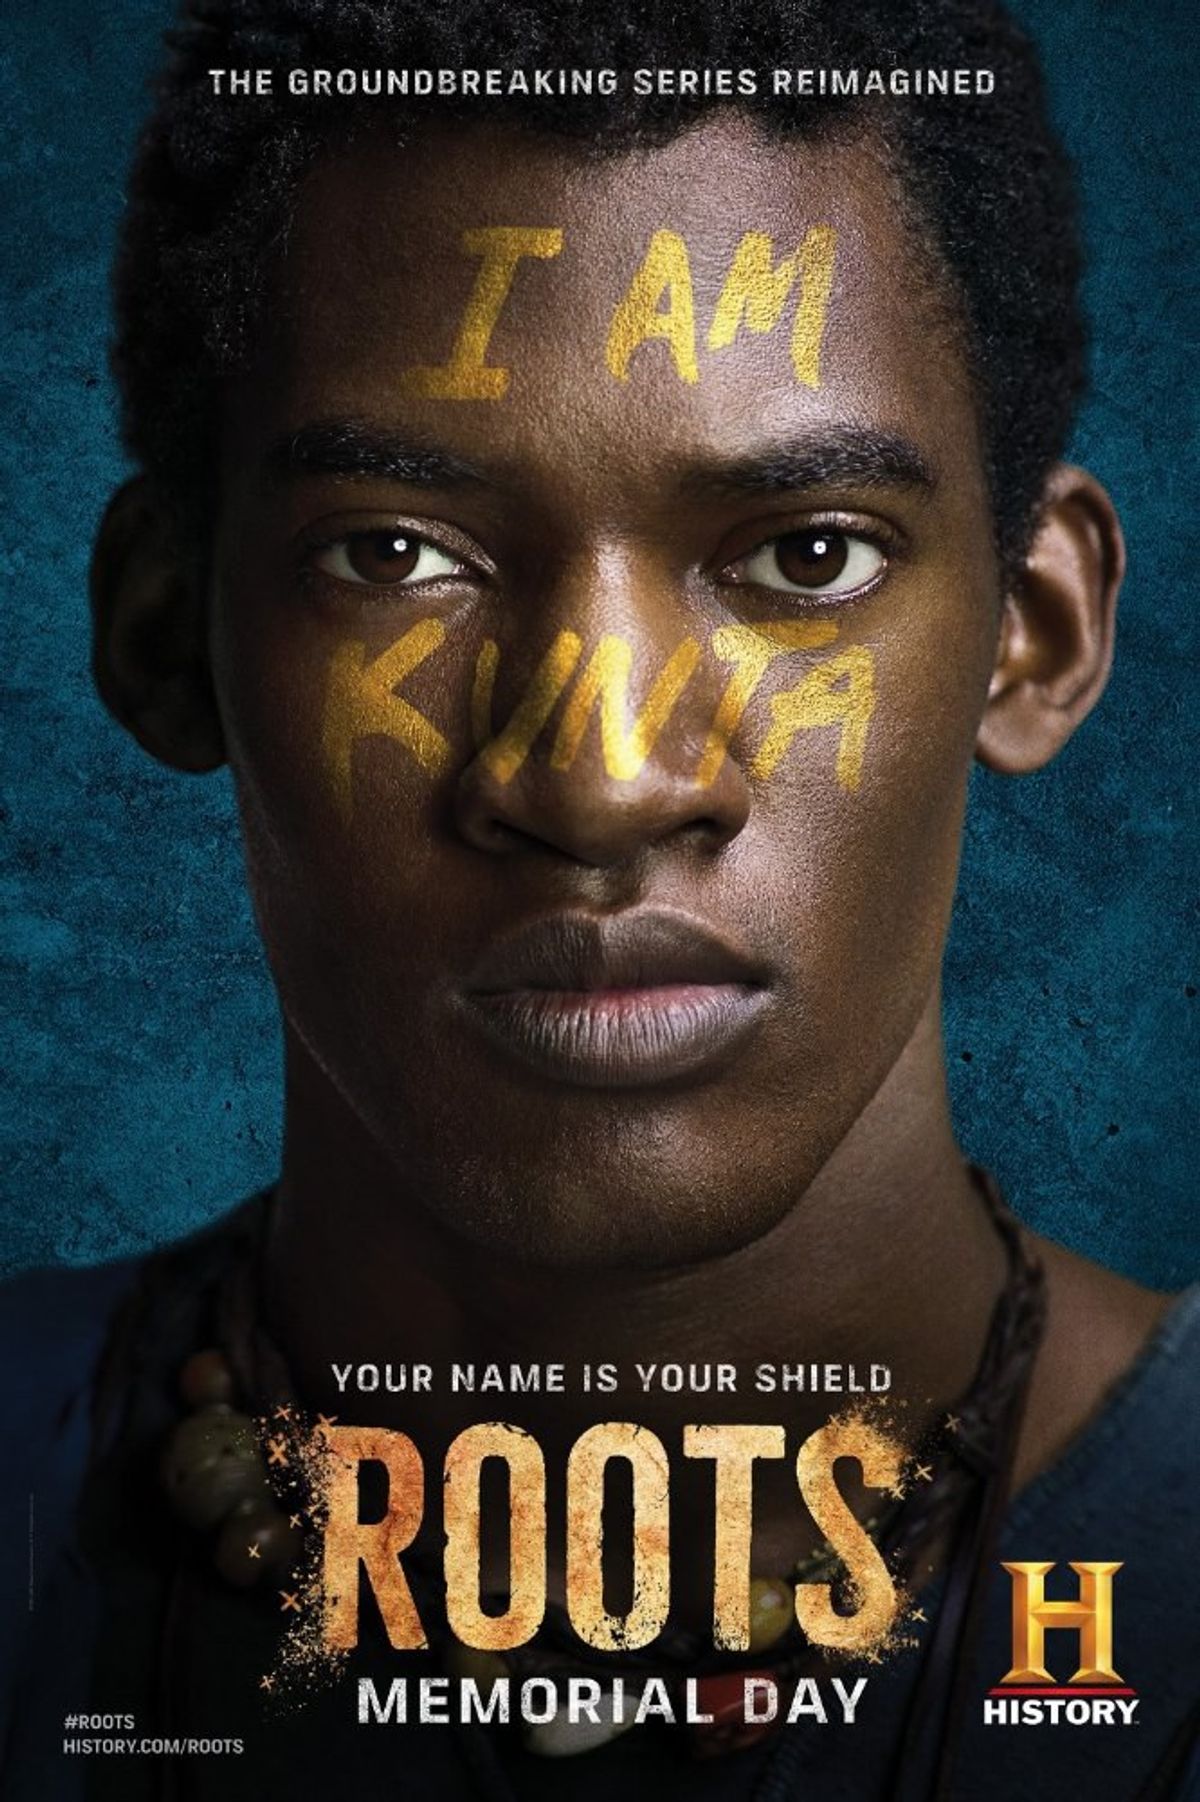 Why Remake "Roots"?